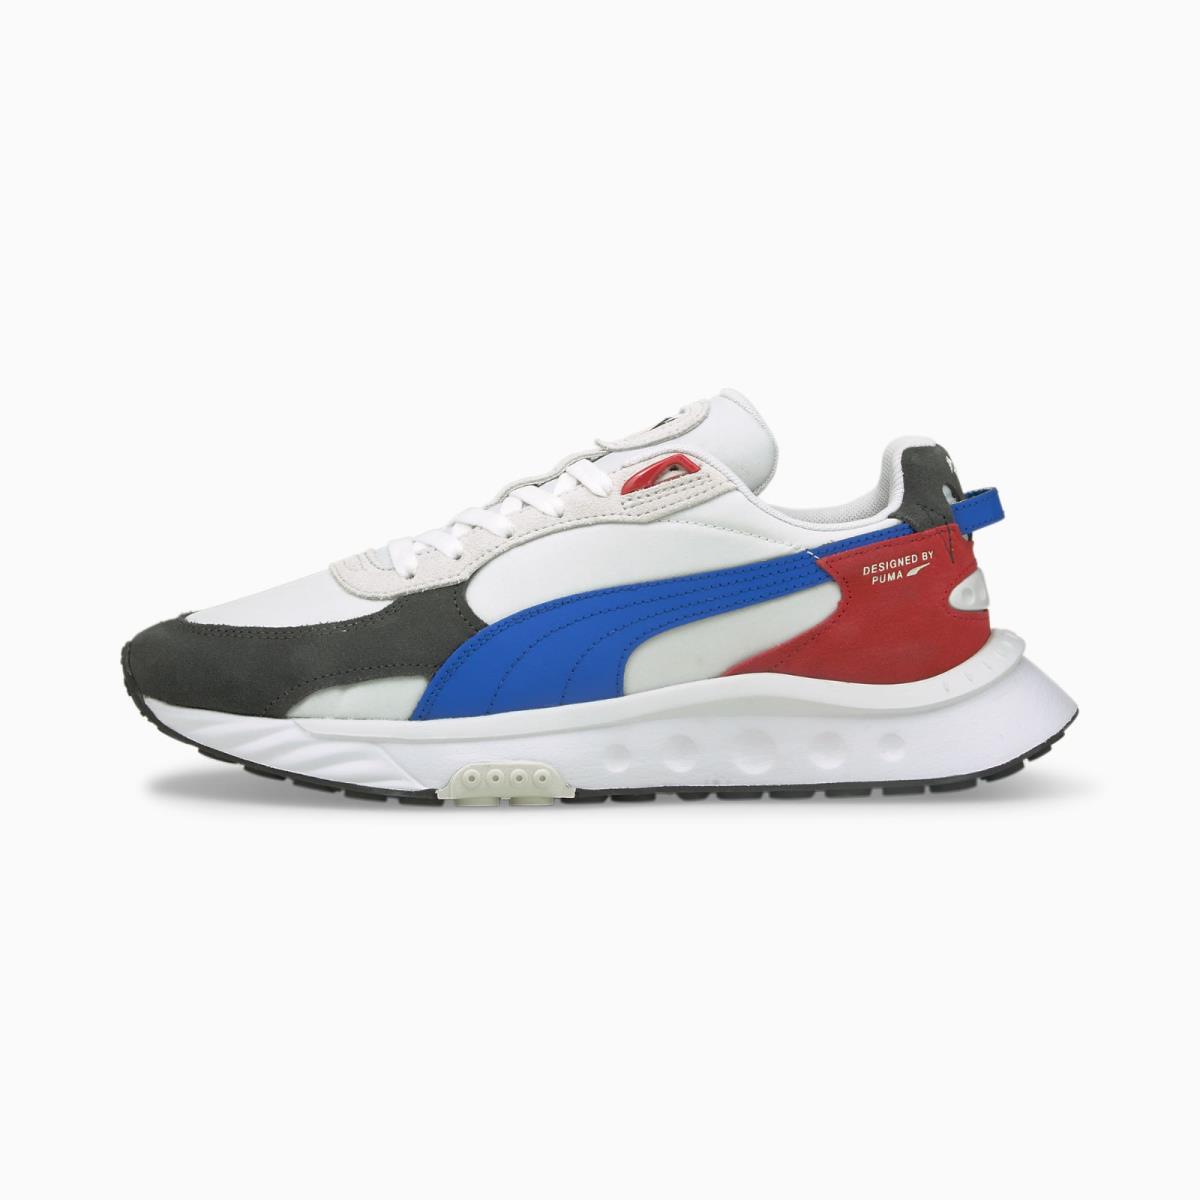 Puma Wild Rider Rollin - White Blue Red / 38151704 / Mens Shoes Sneakers